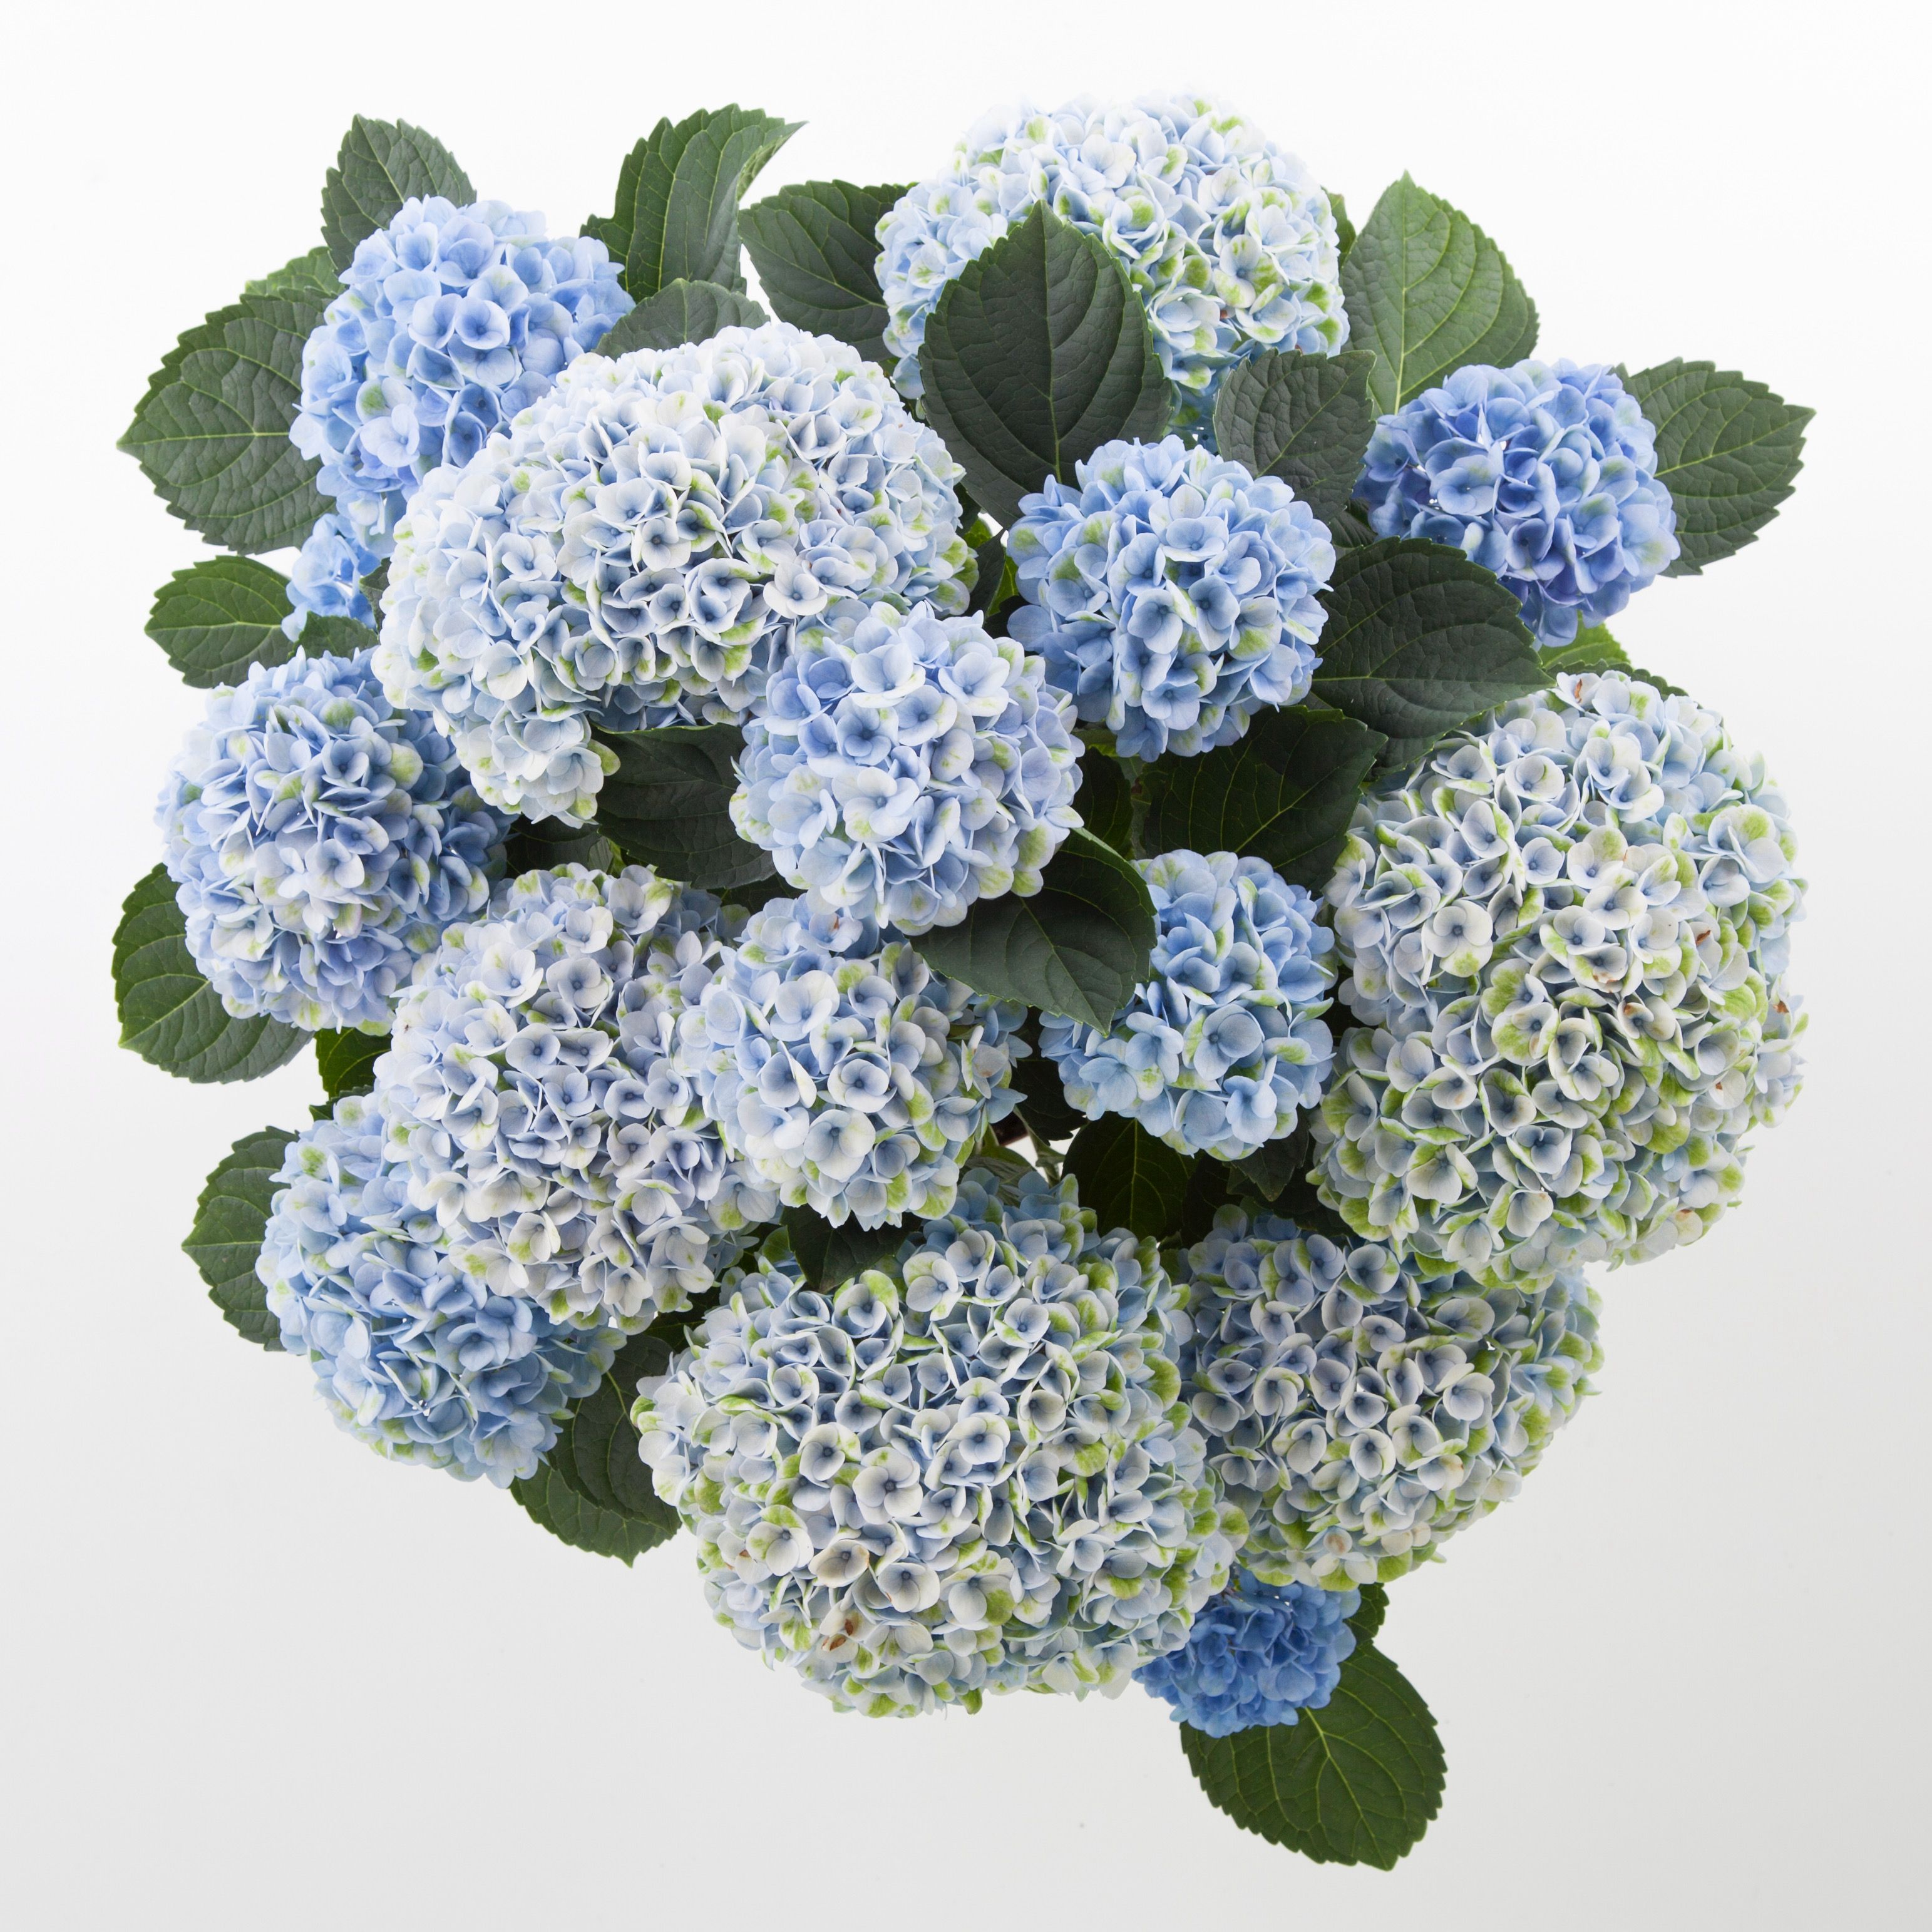 images/plants/hydrangea/hyd-magical-everlasting-revolution/hyd-magical-everlasting-revolution-0097.jpg